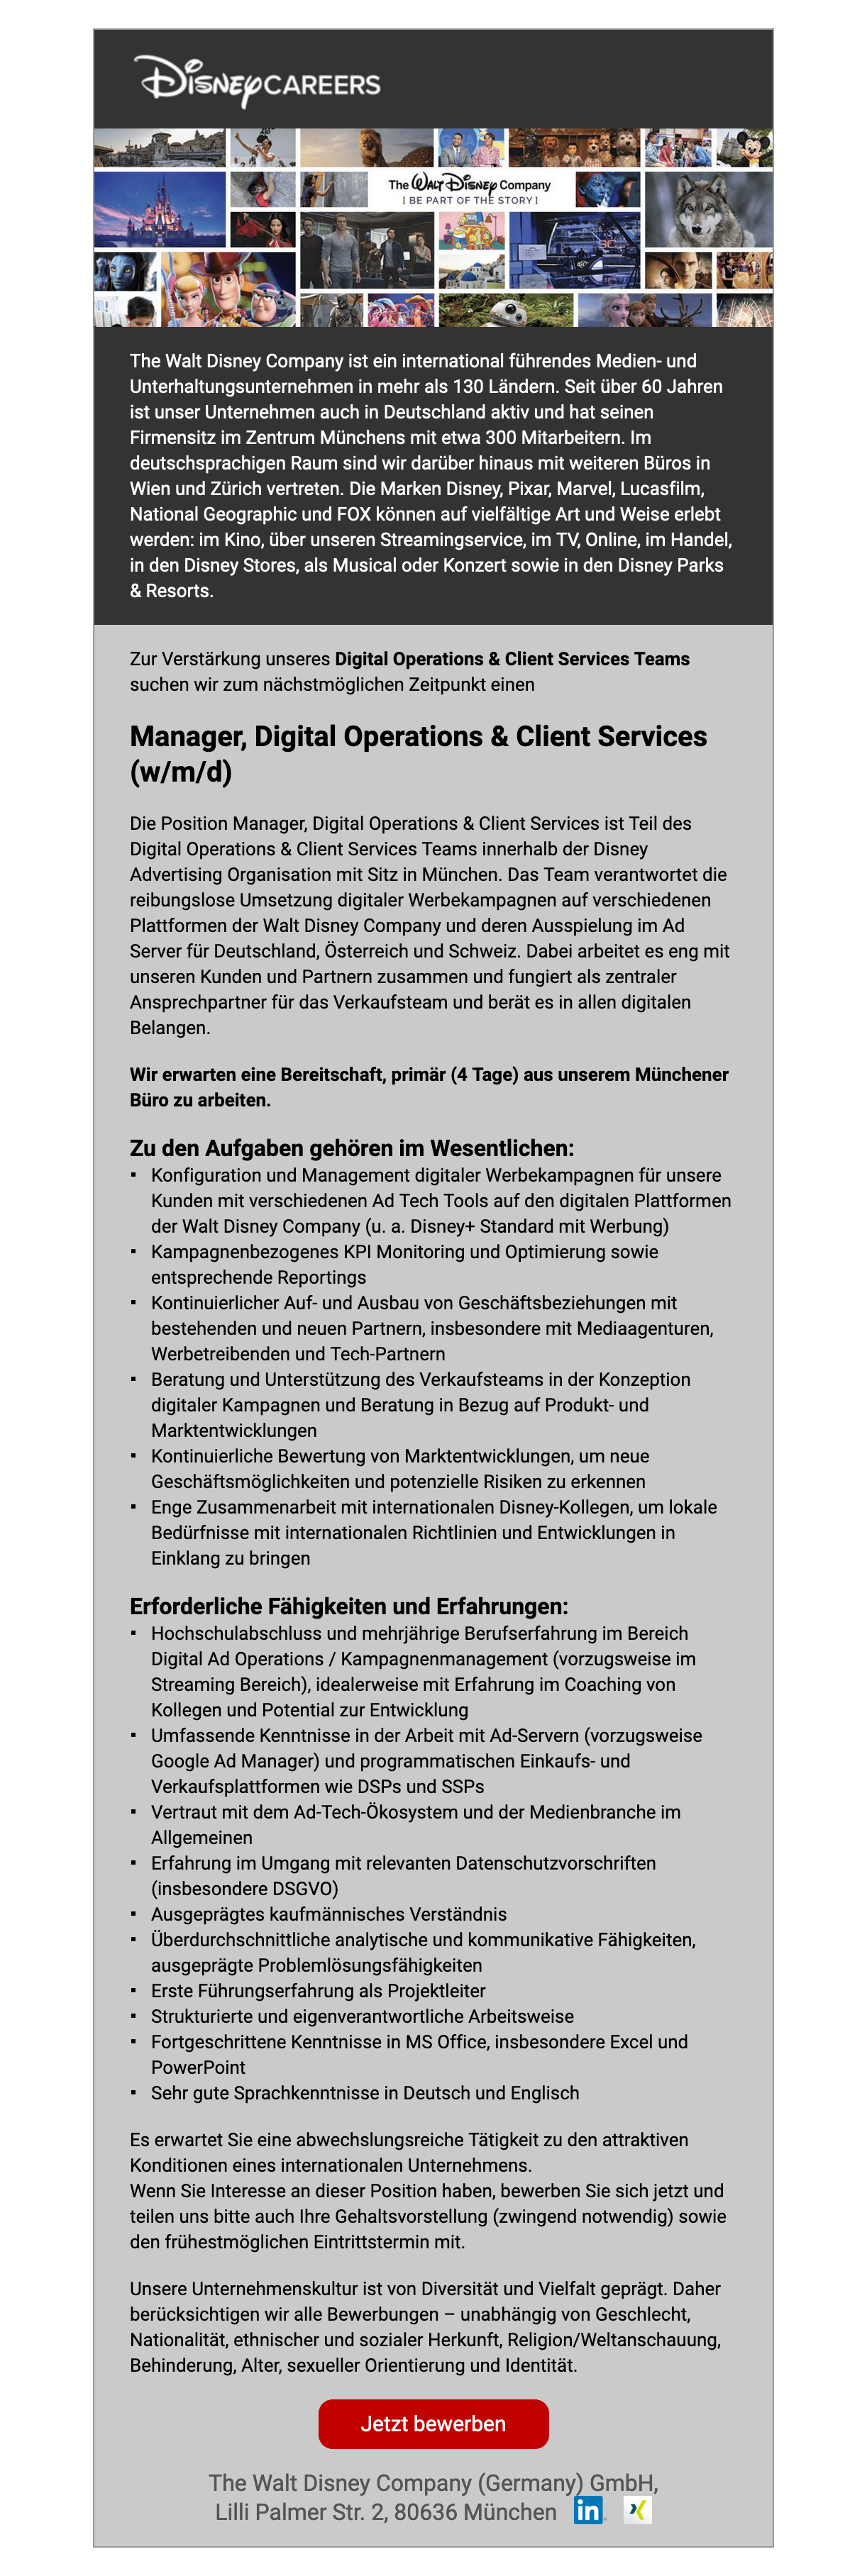 Manager, Digital Operations und Client Services (w/m/d)